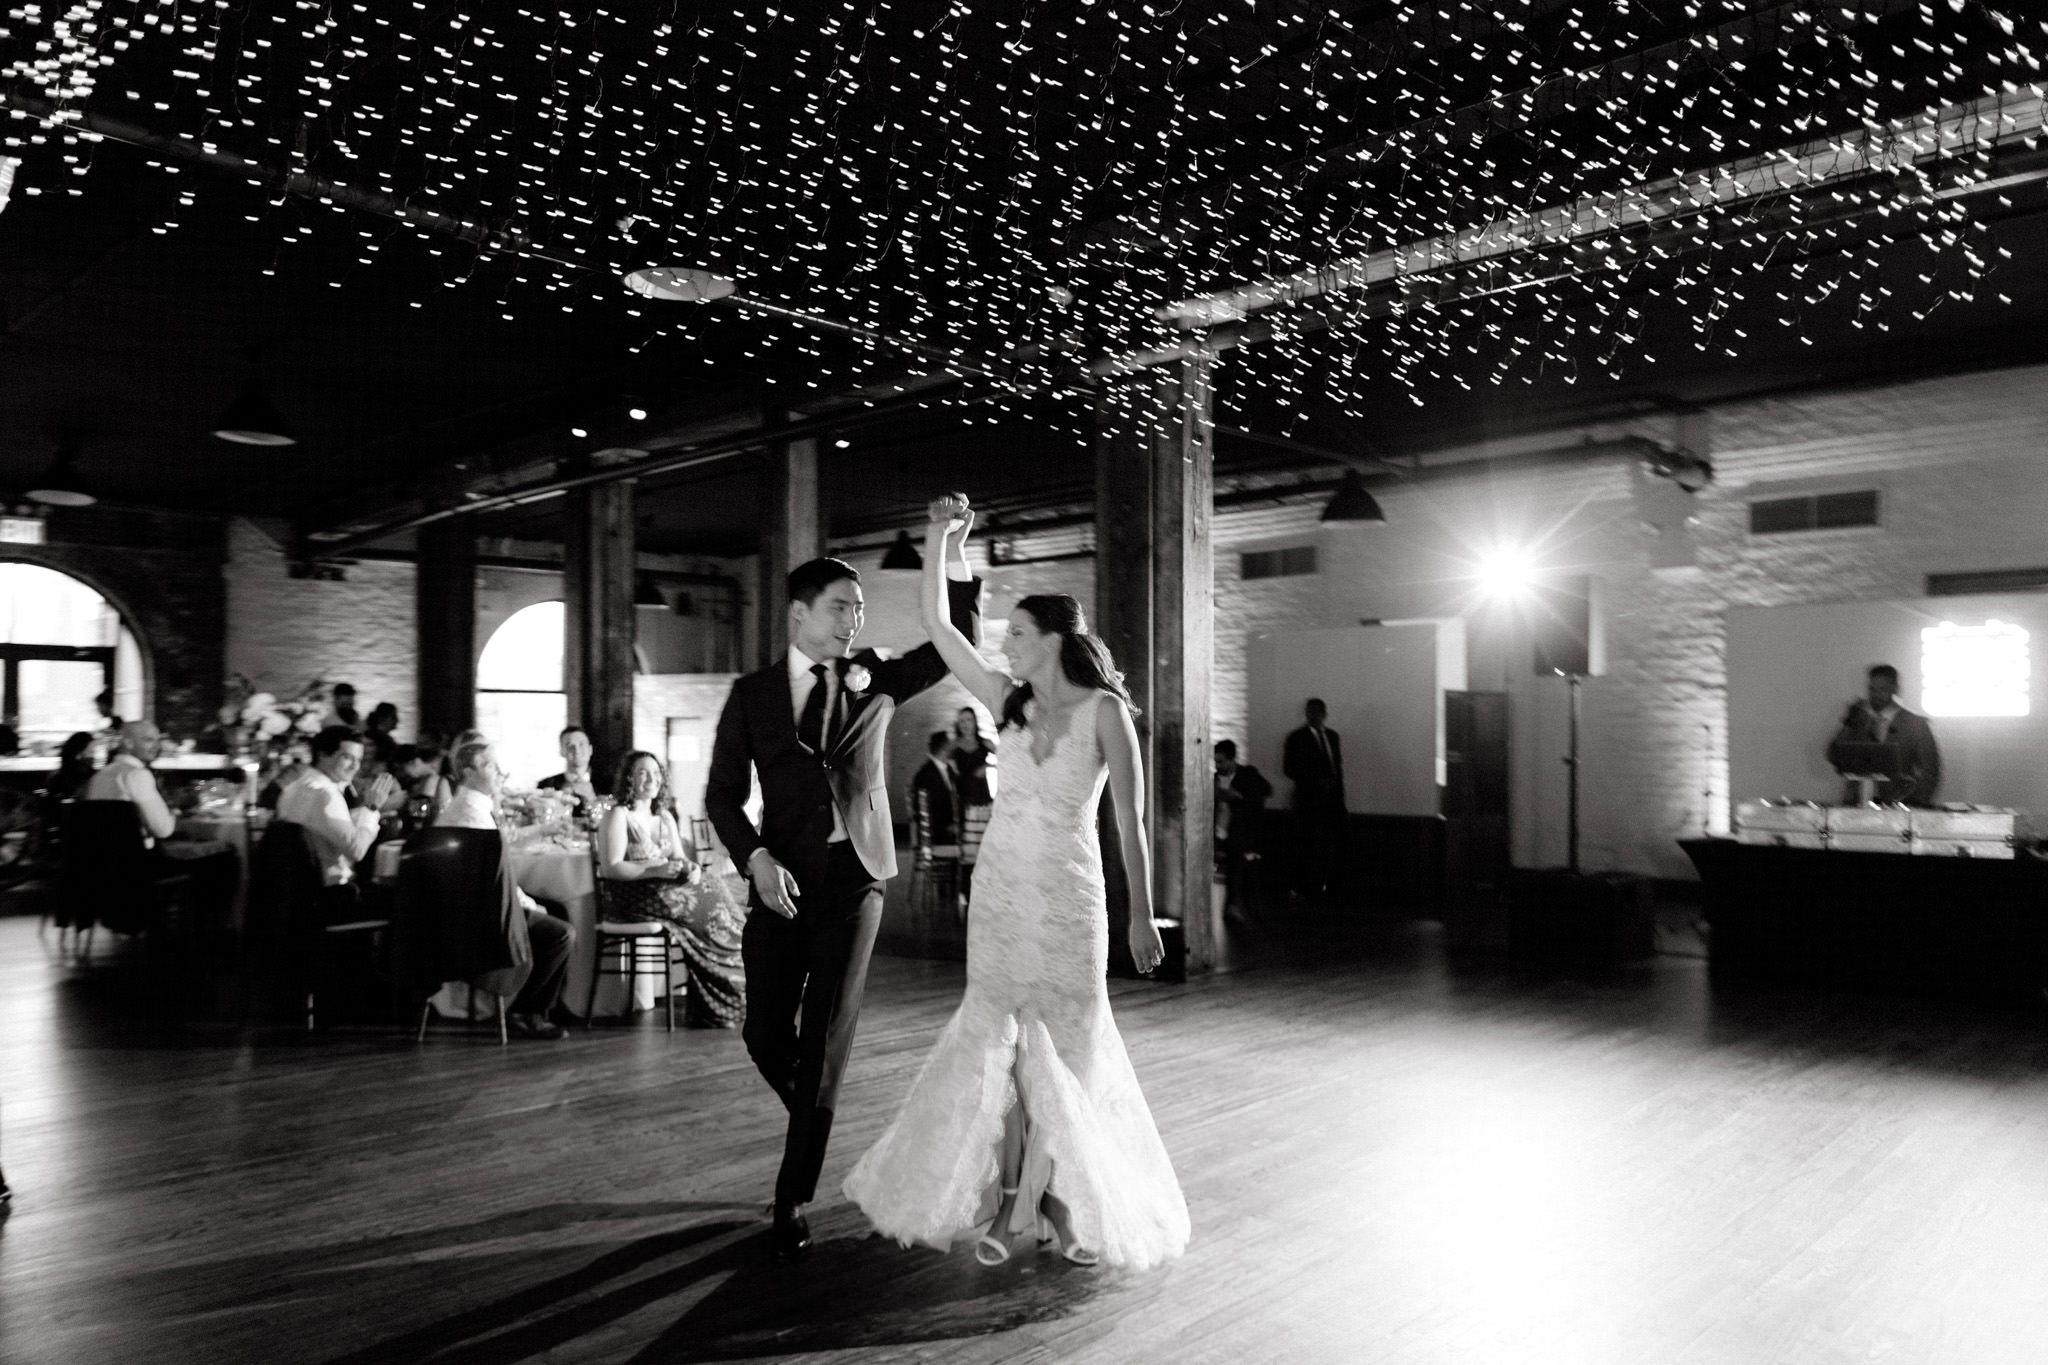 Editorial wedding photo of the bride and groom dancing as the guests watch them. NYC wedding venue image by Jenny Fu Studio